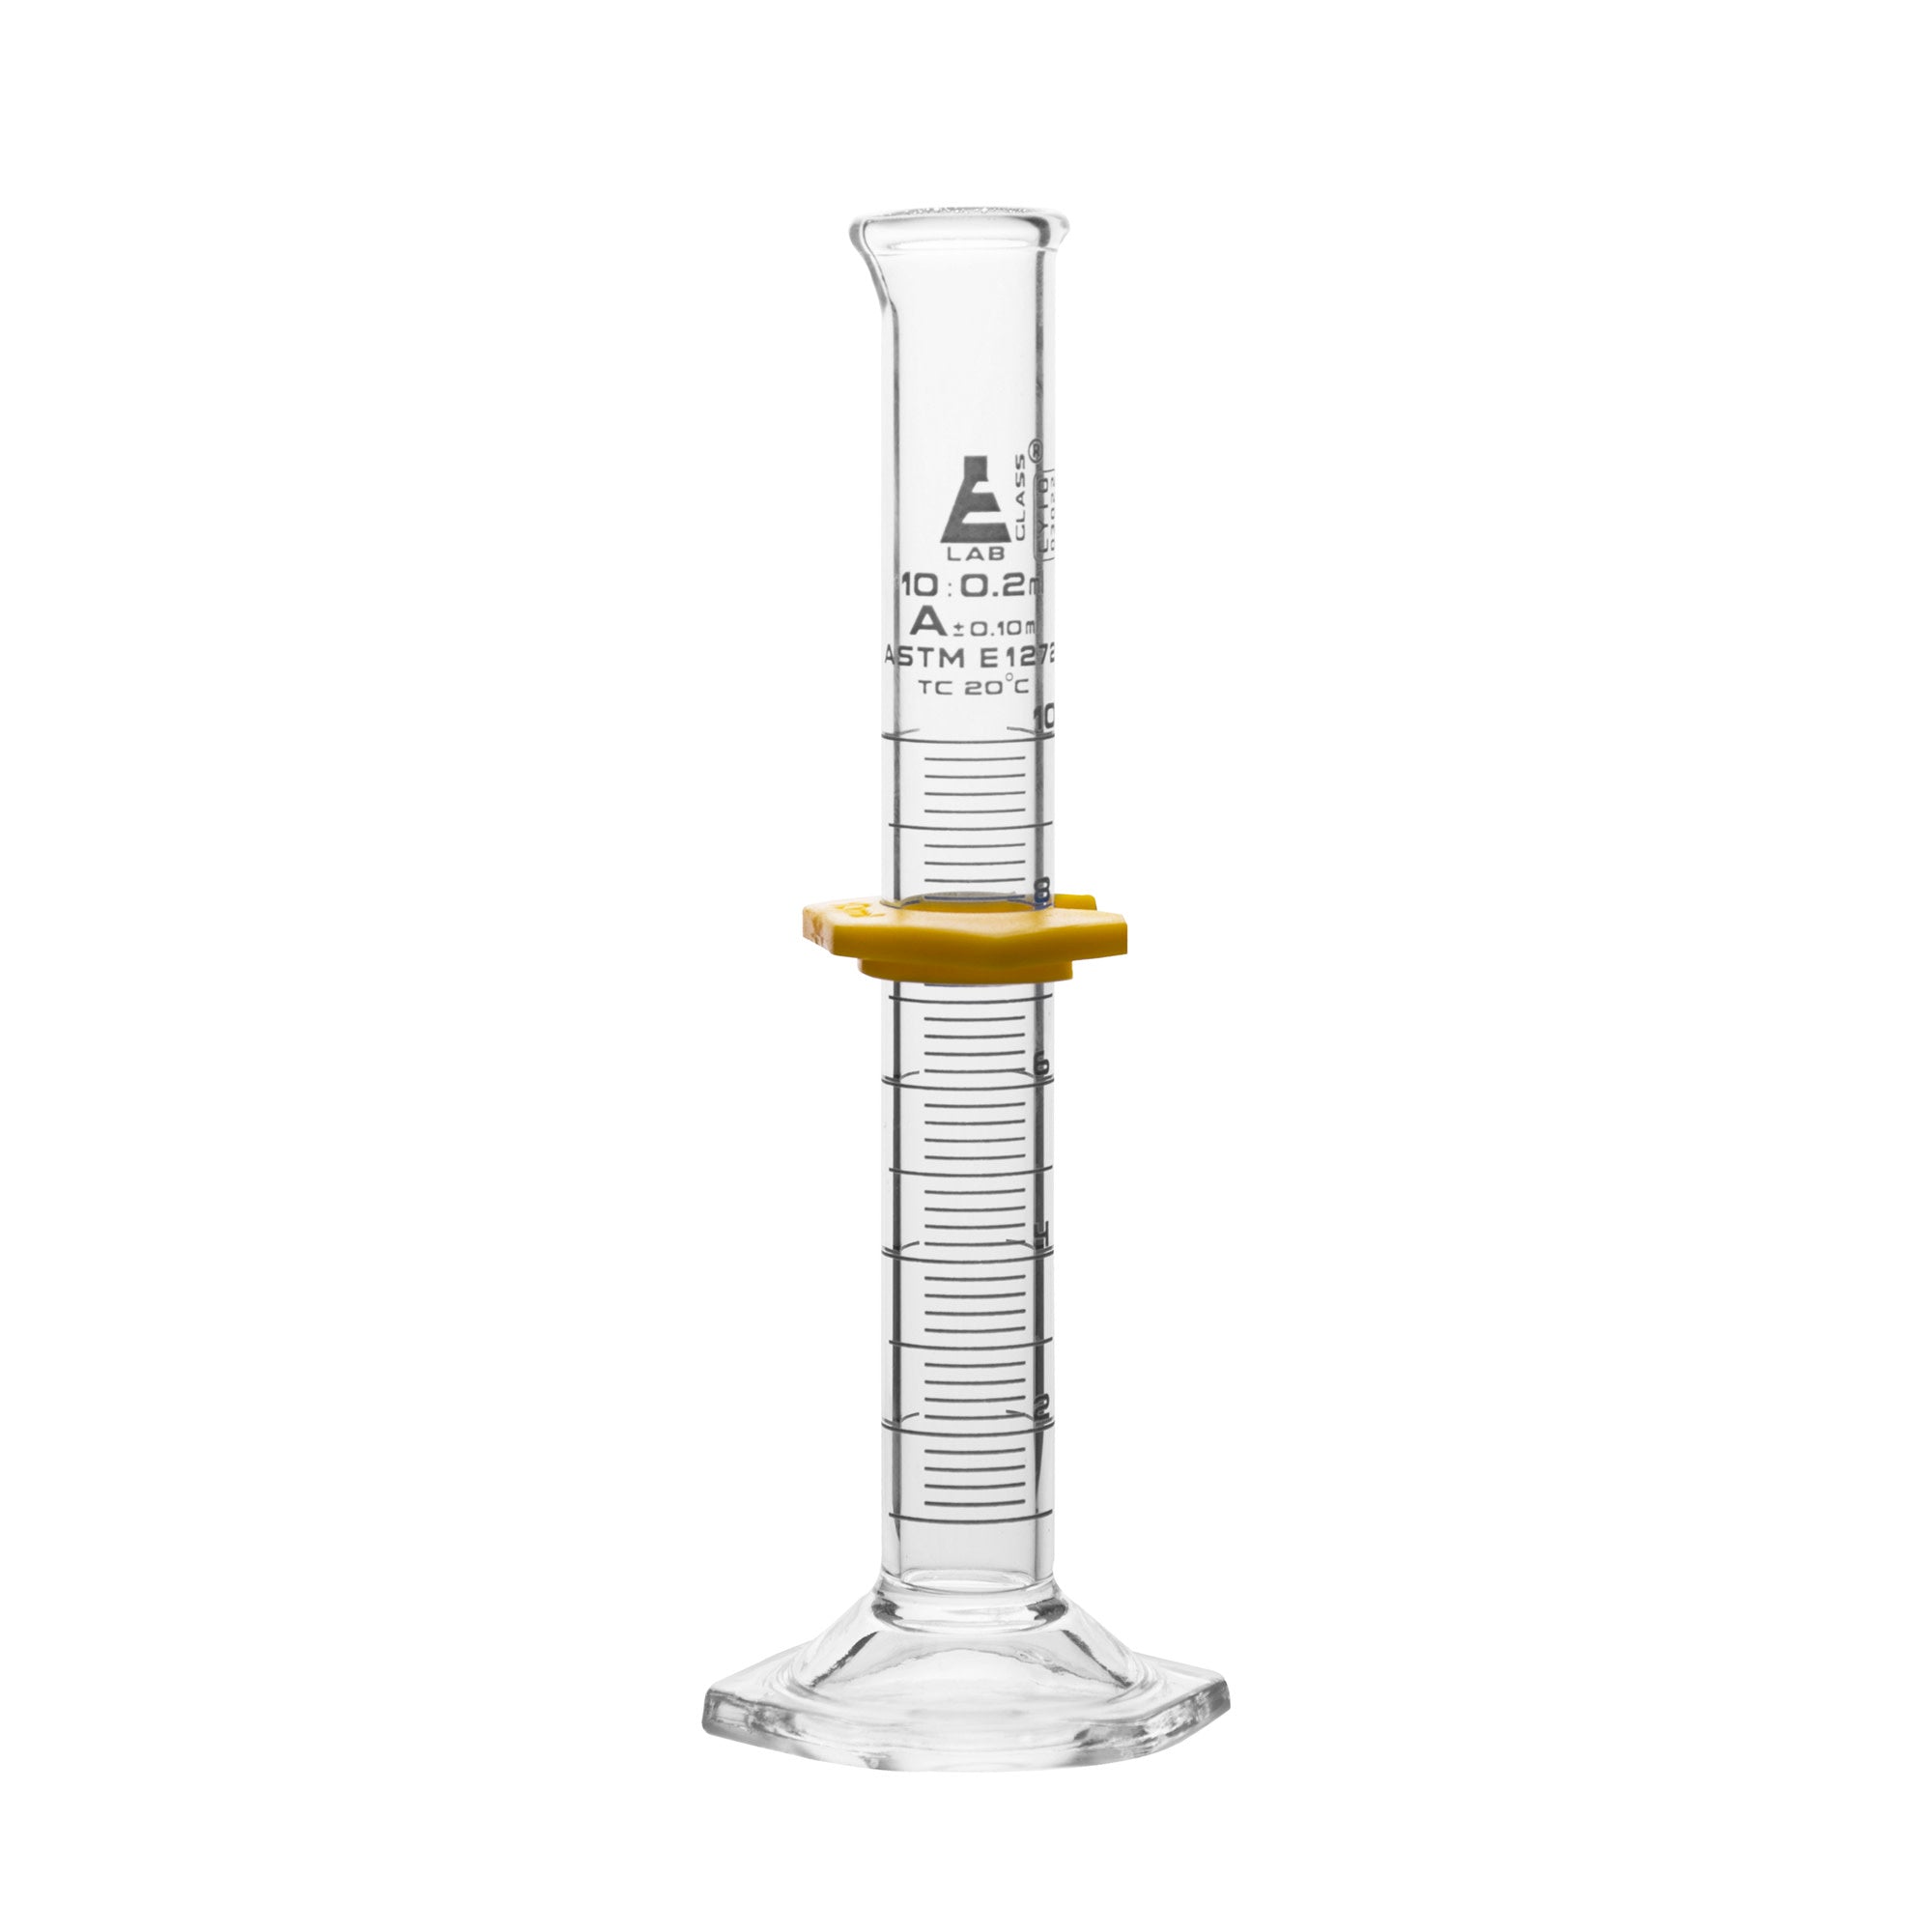 Borosilicate Glass Graduated Cylinder with Guard, 10 ml, 0.2 ml Graduation, Class A, ASTM, Autoclavable